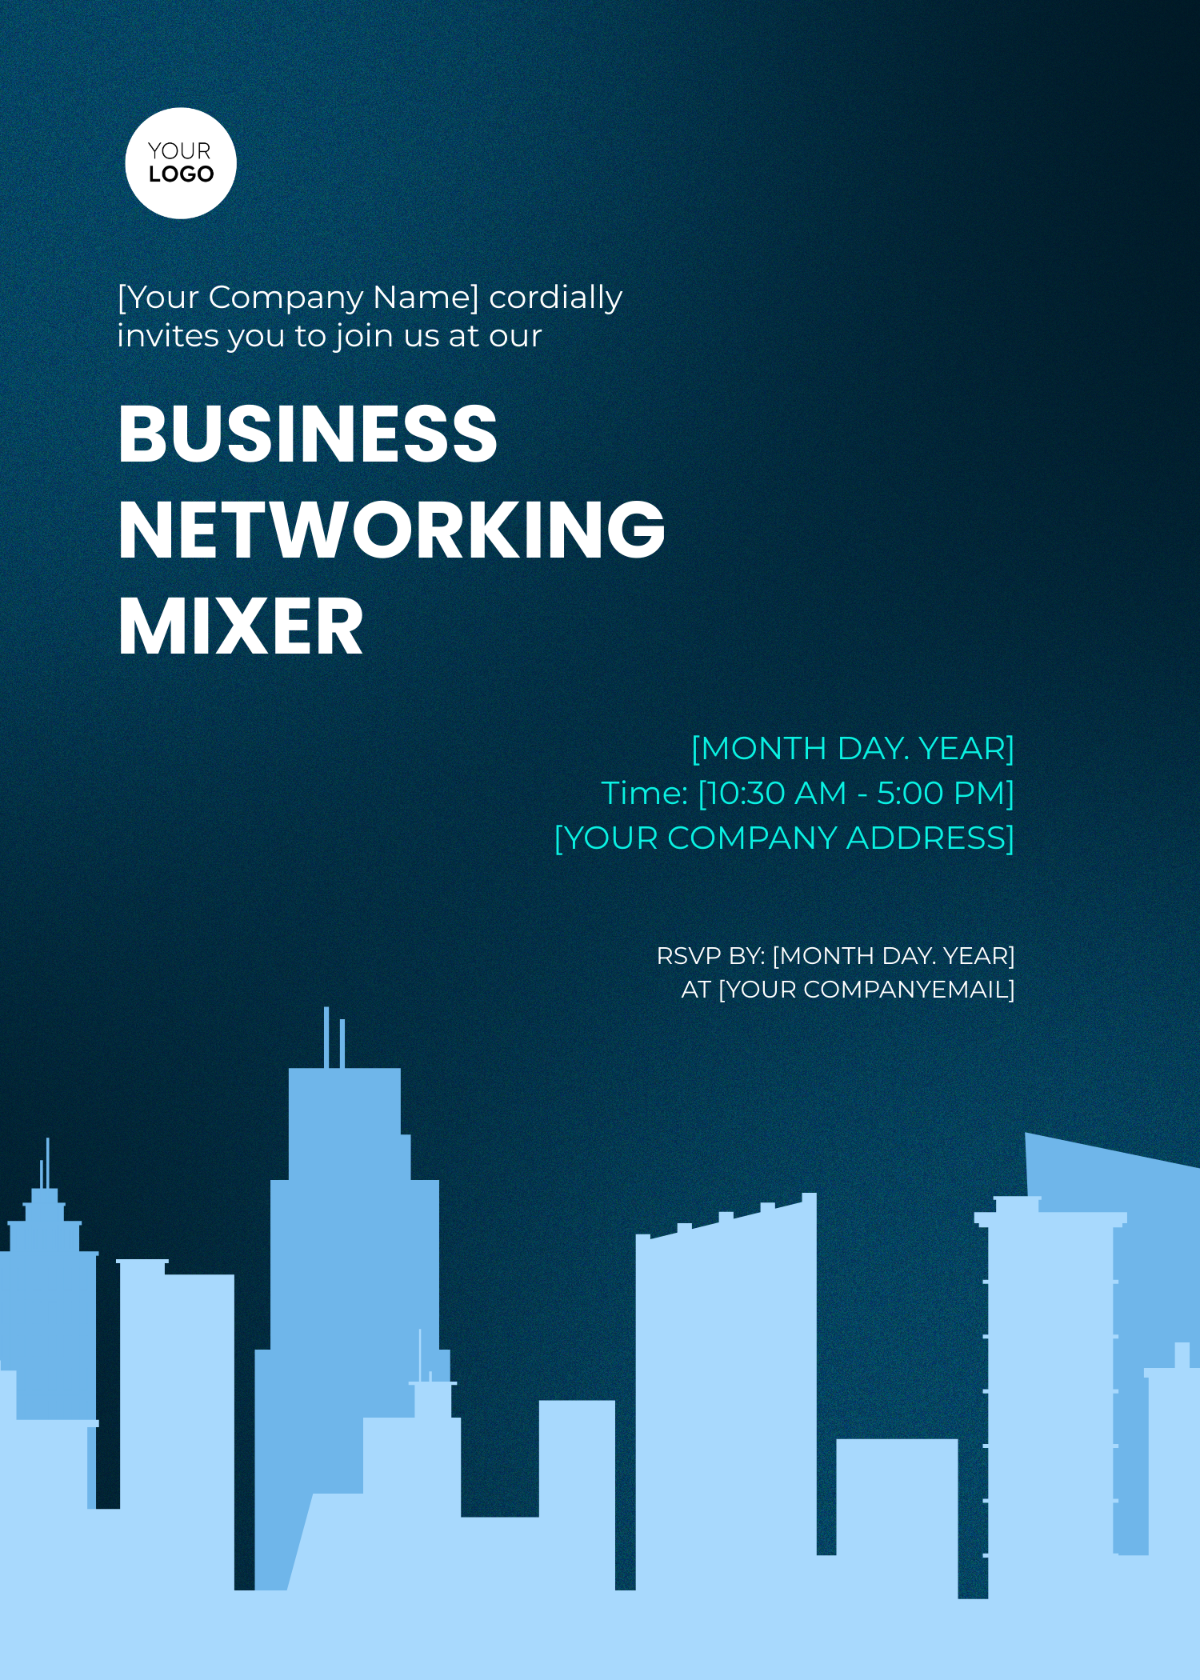 Free Business Networking Mixer Invitation Card Template